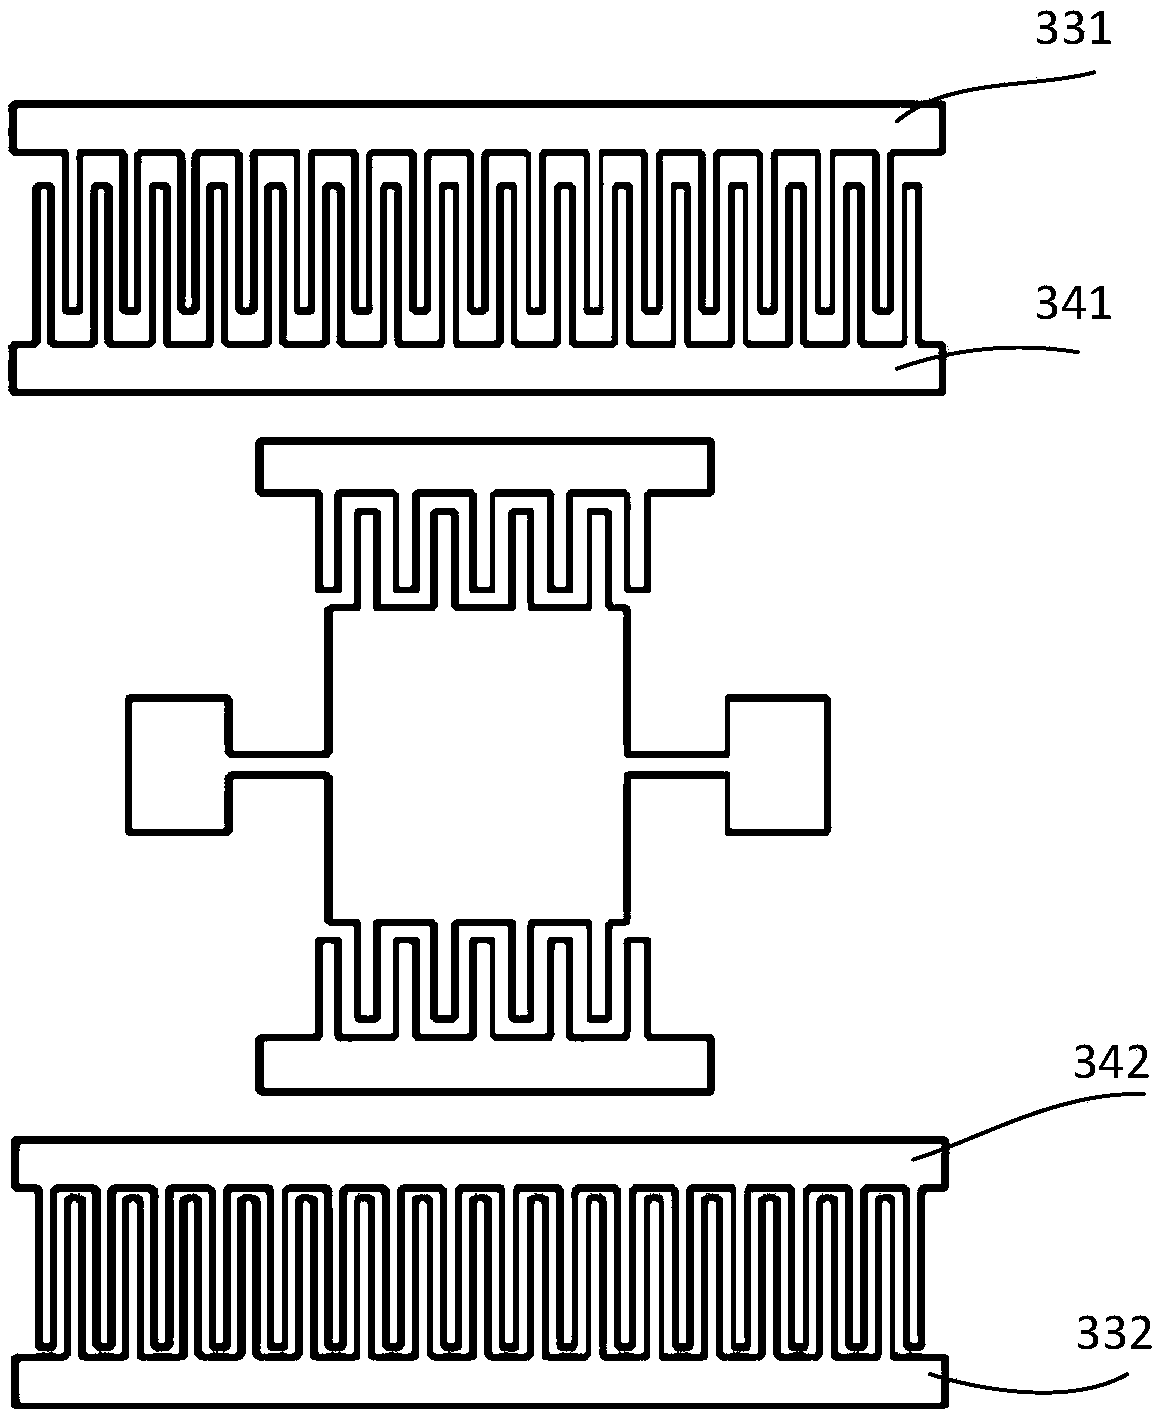 Comb driver with self-cleaning function